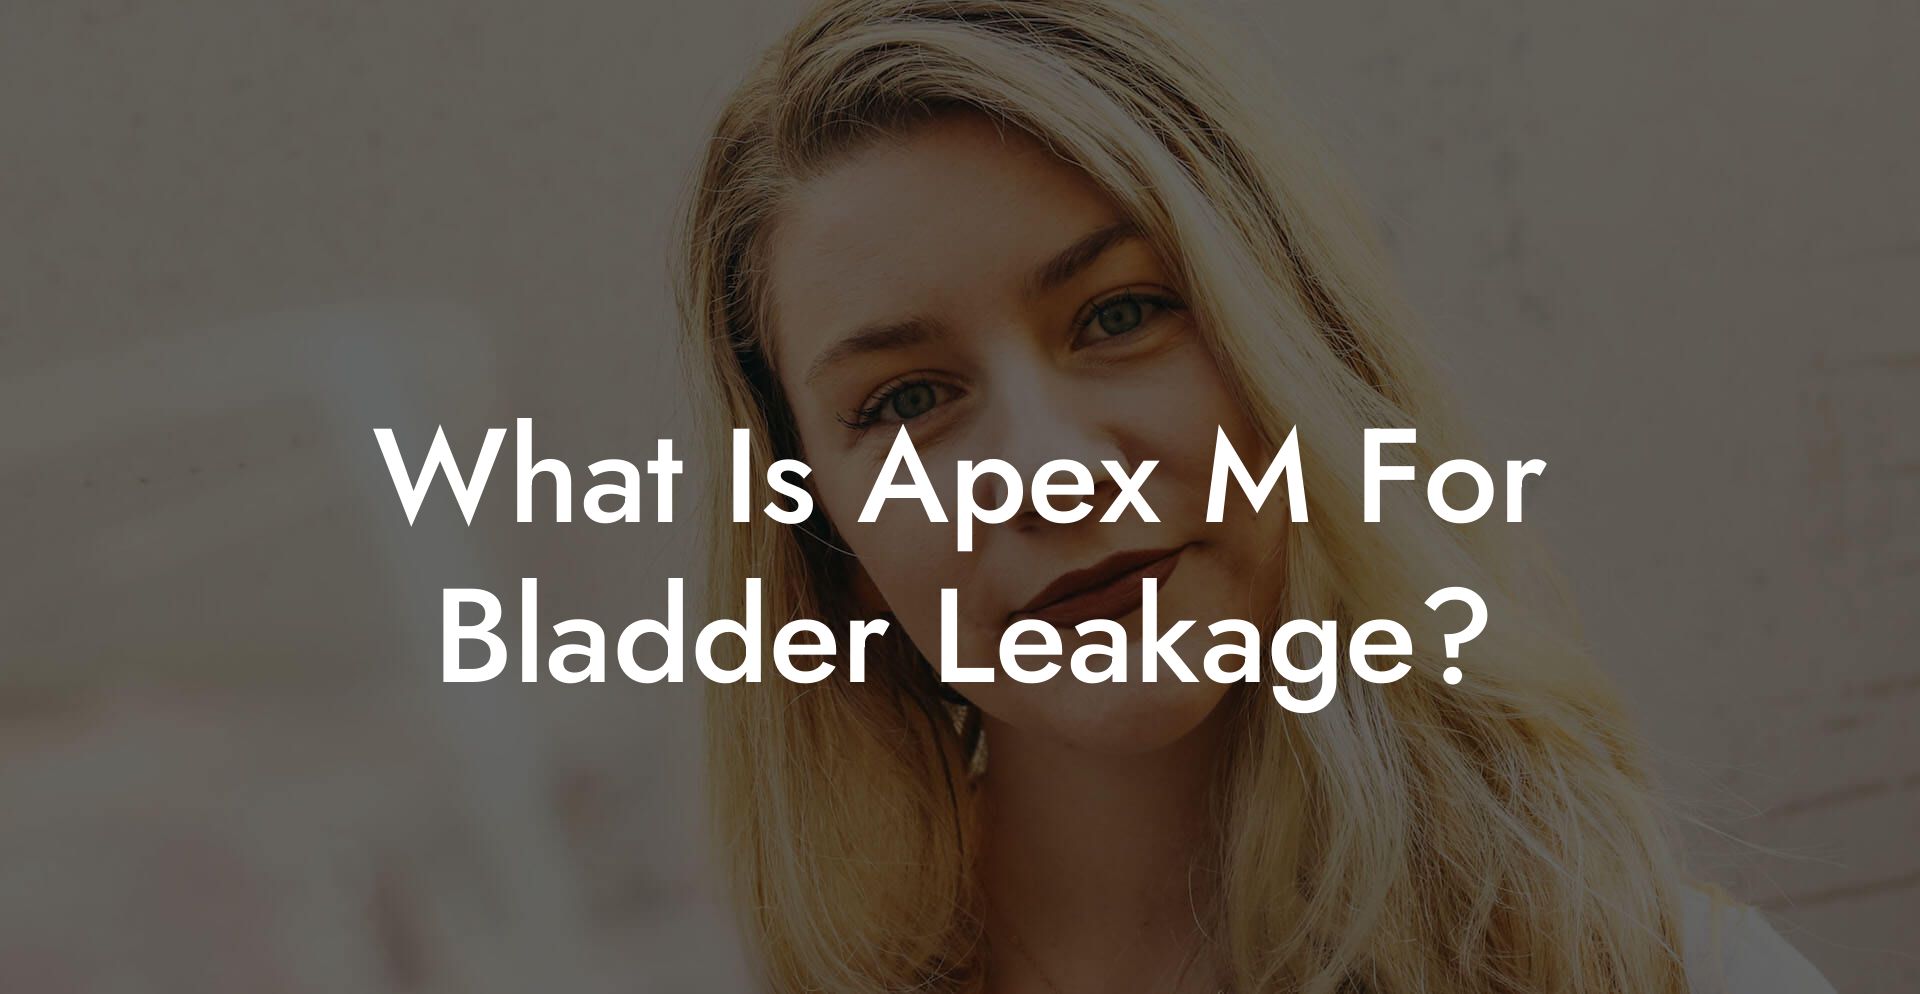 What Is Apex M For Bladder Leakage?